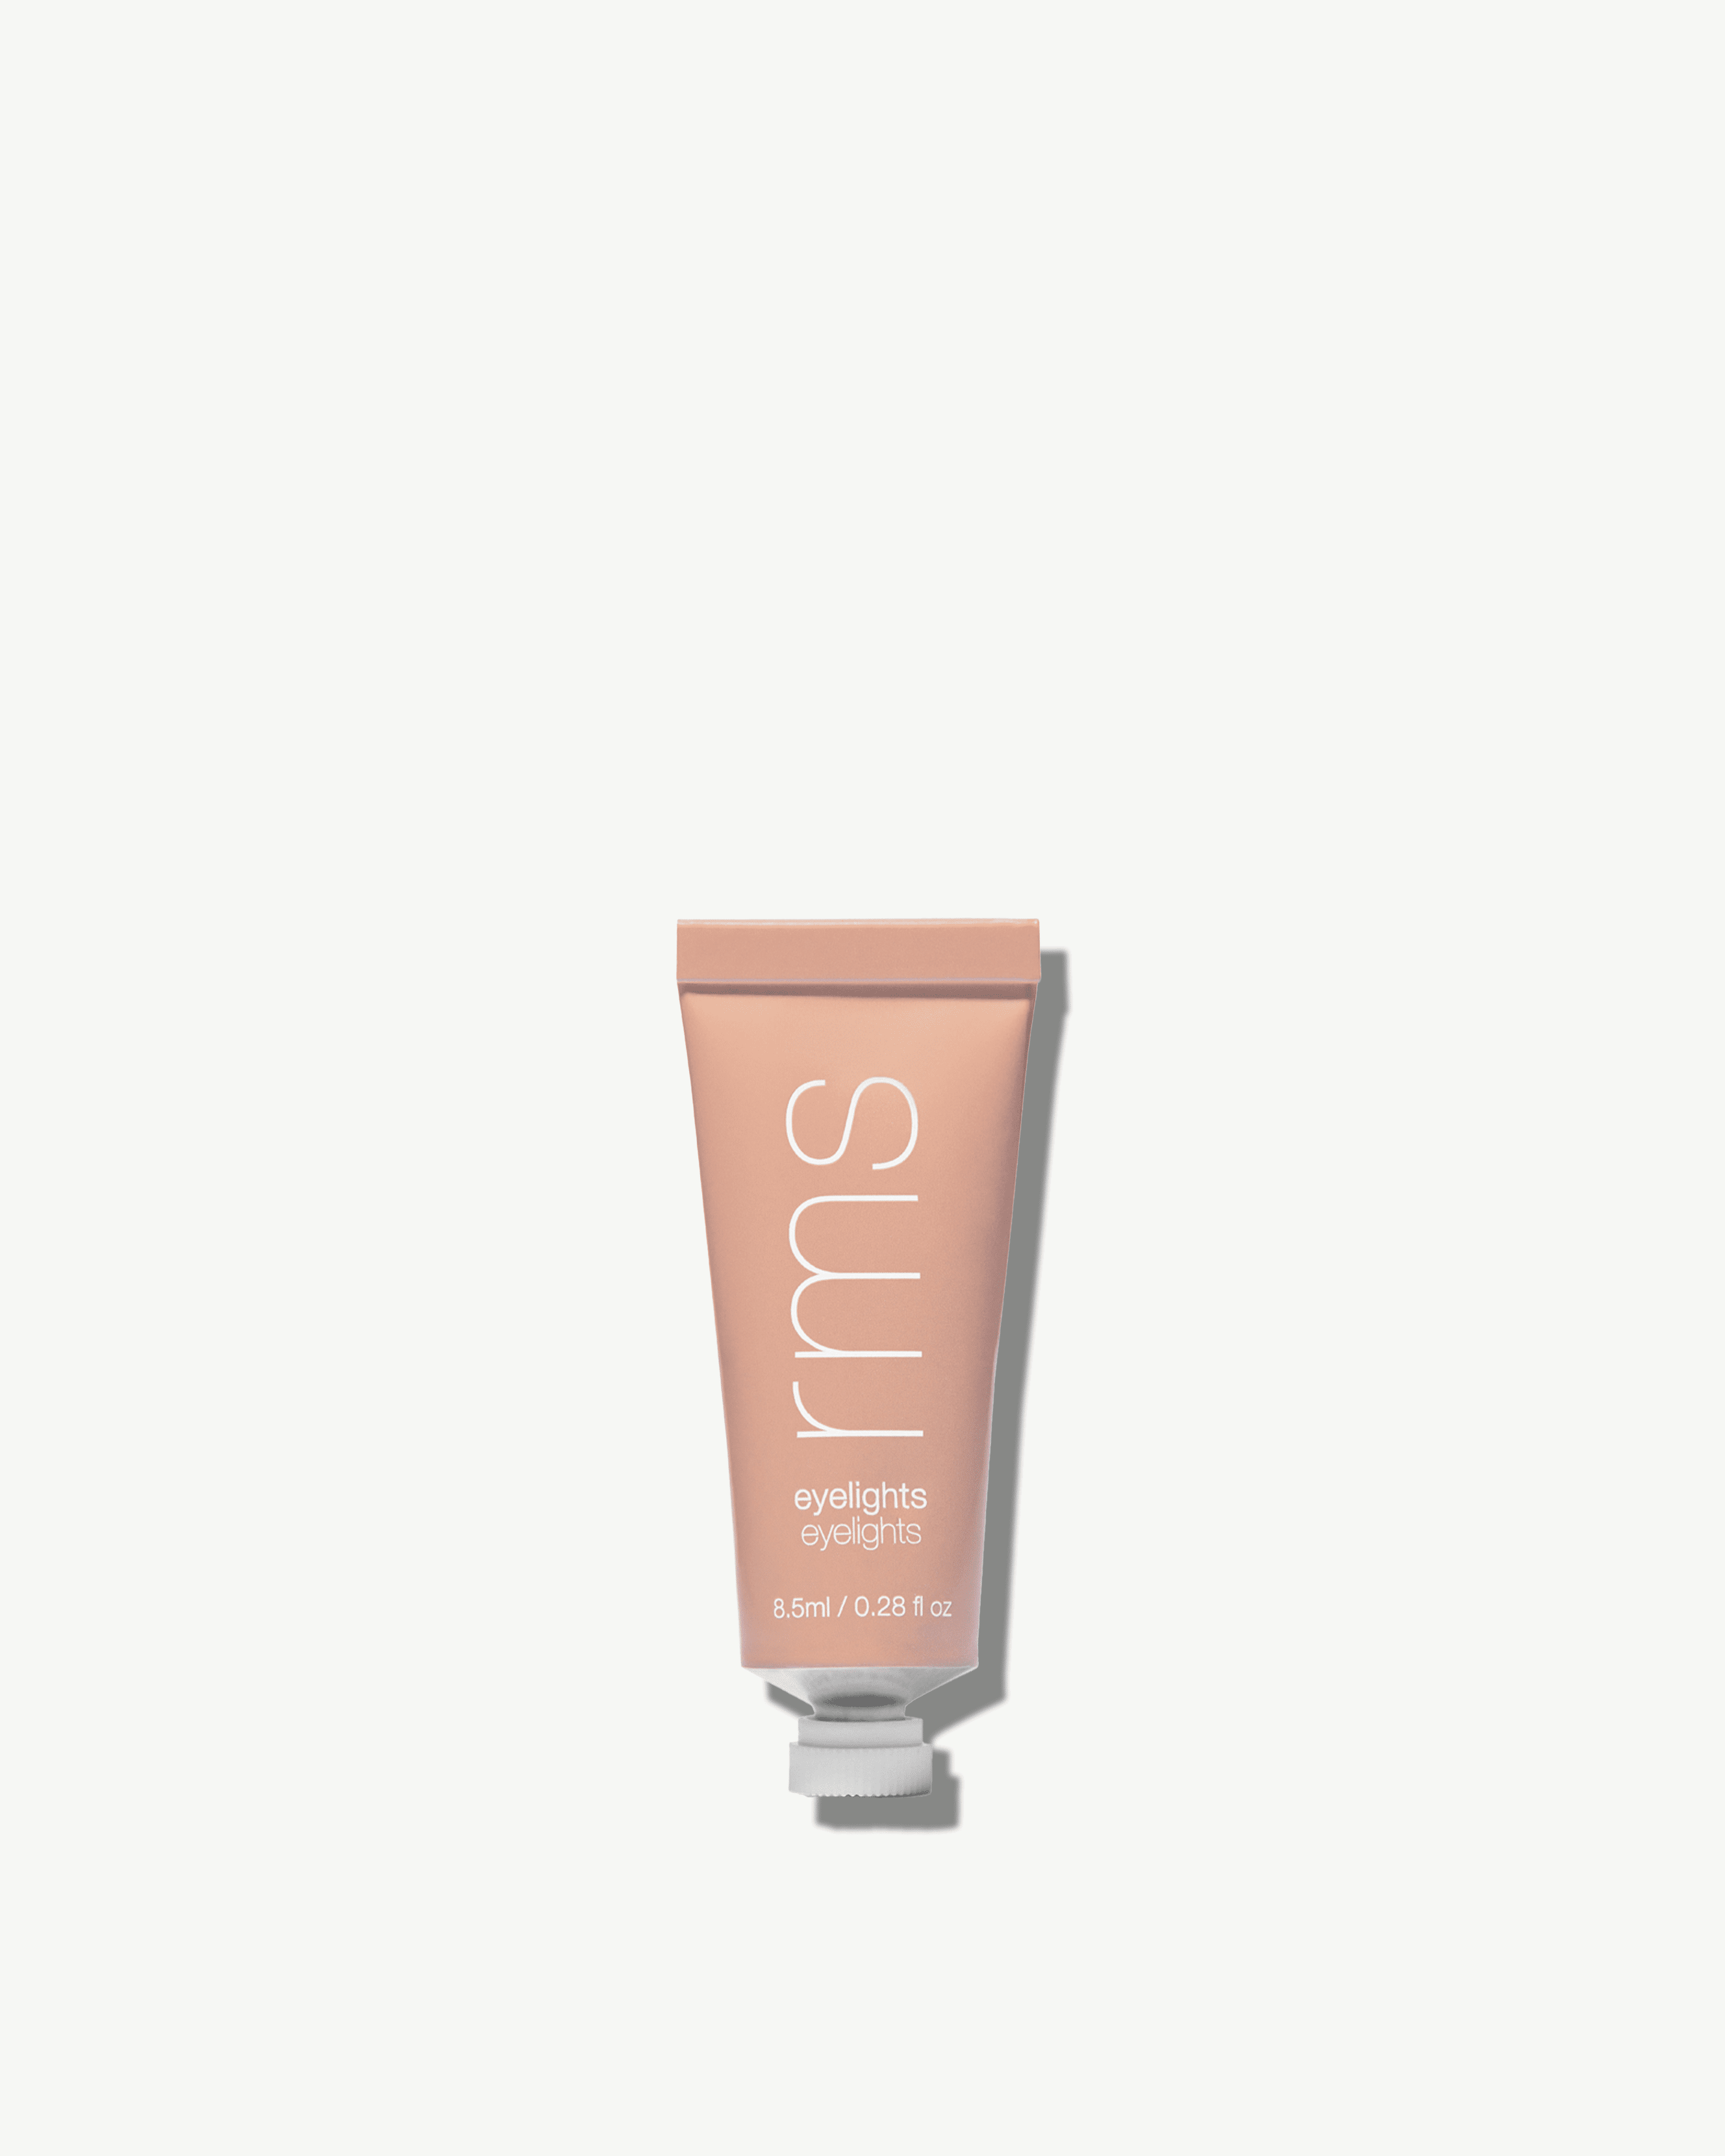 Sunbeam (a golden coral with a hint of peach)